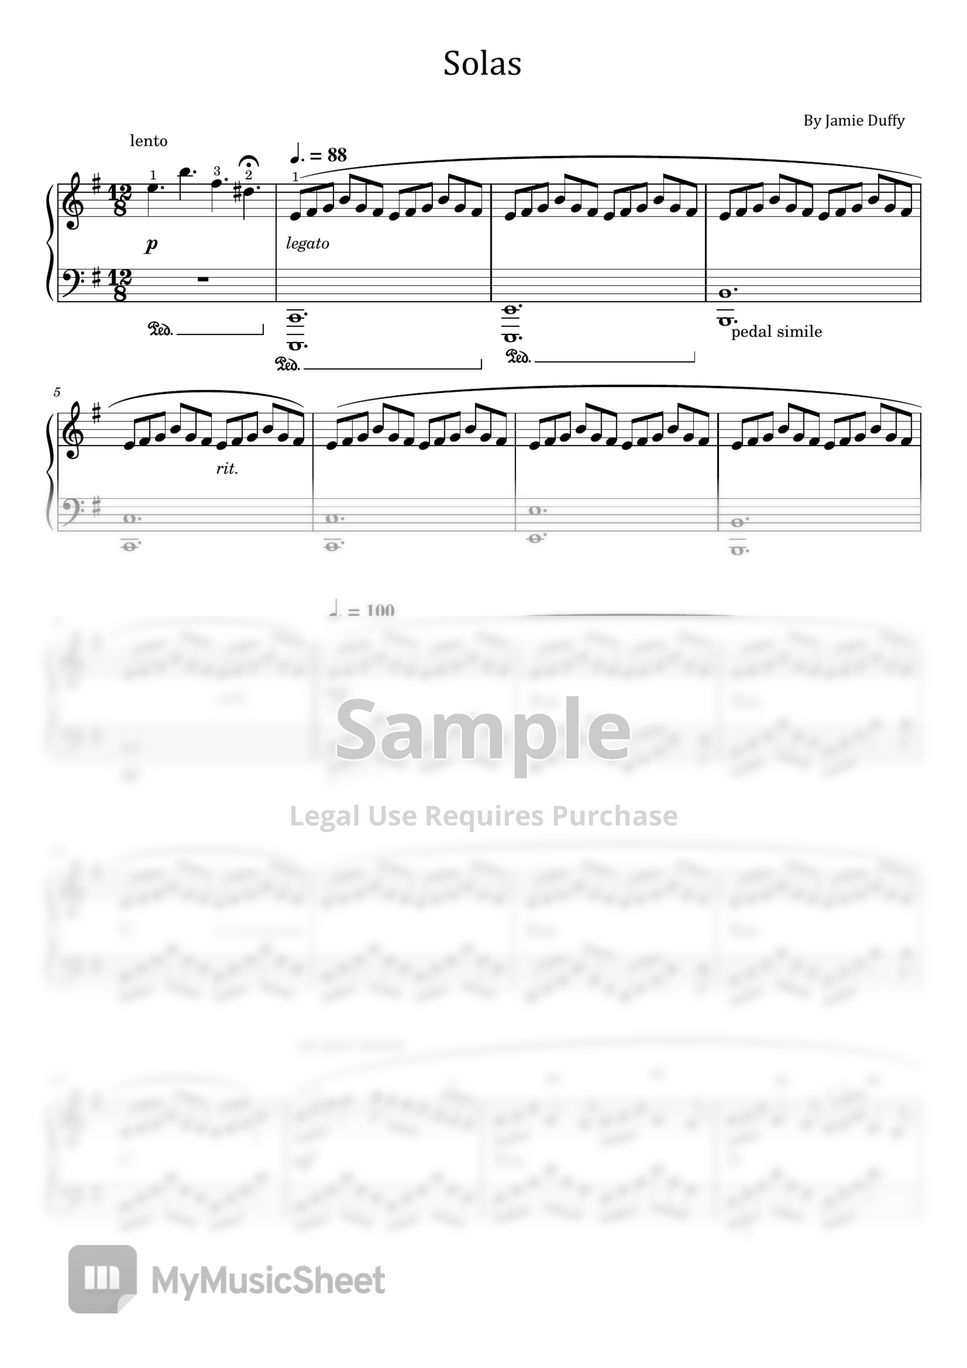 Jamie Duffy - - Solas (For Piano Solo - With Finger and Chord) Sheets ...